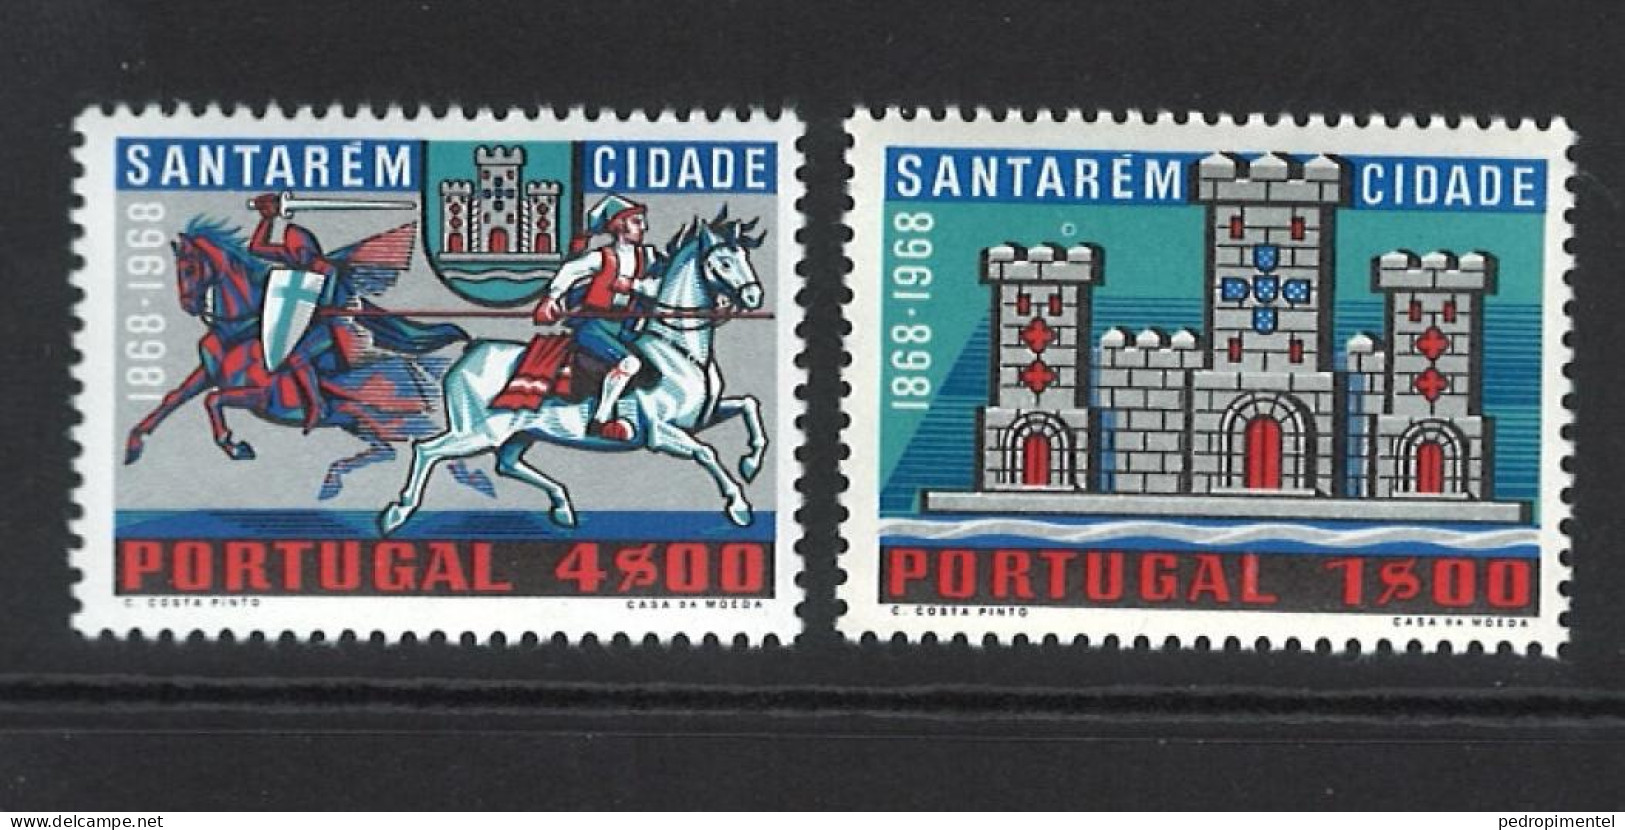 Portugal Stamps 1970 "Covilha And Santarem" Condition MNH #1079-1082 (4 Stamps) - Unused Stamps